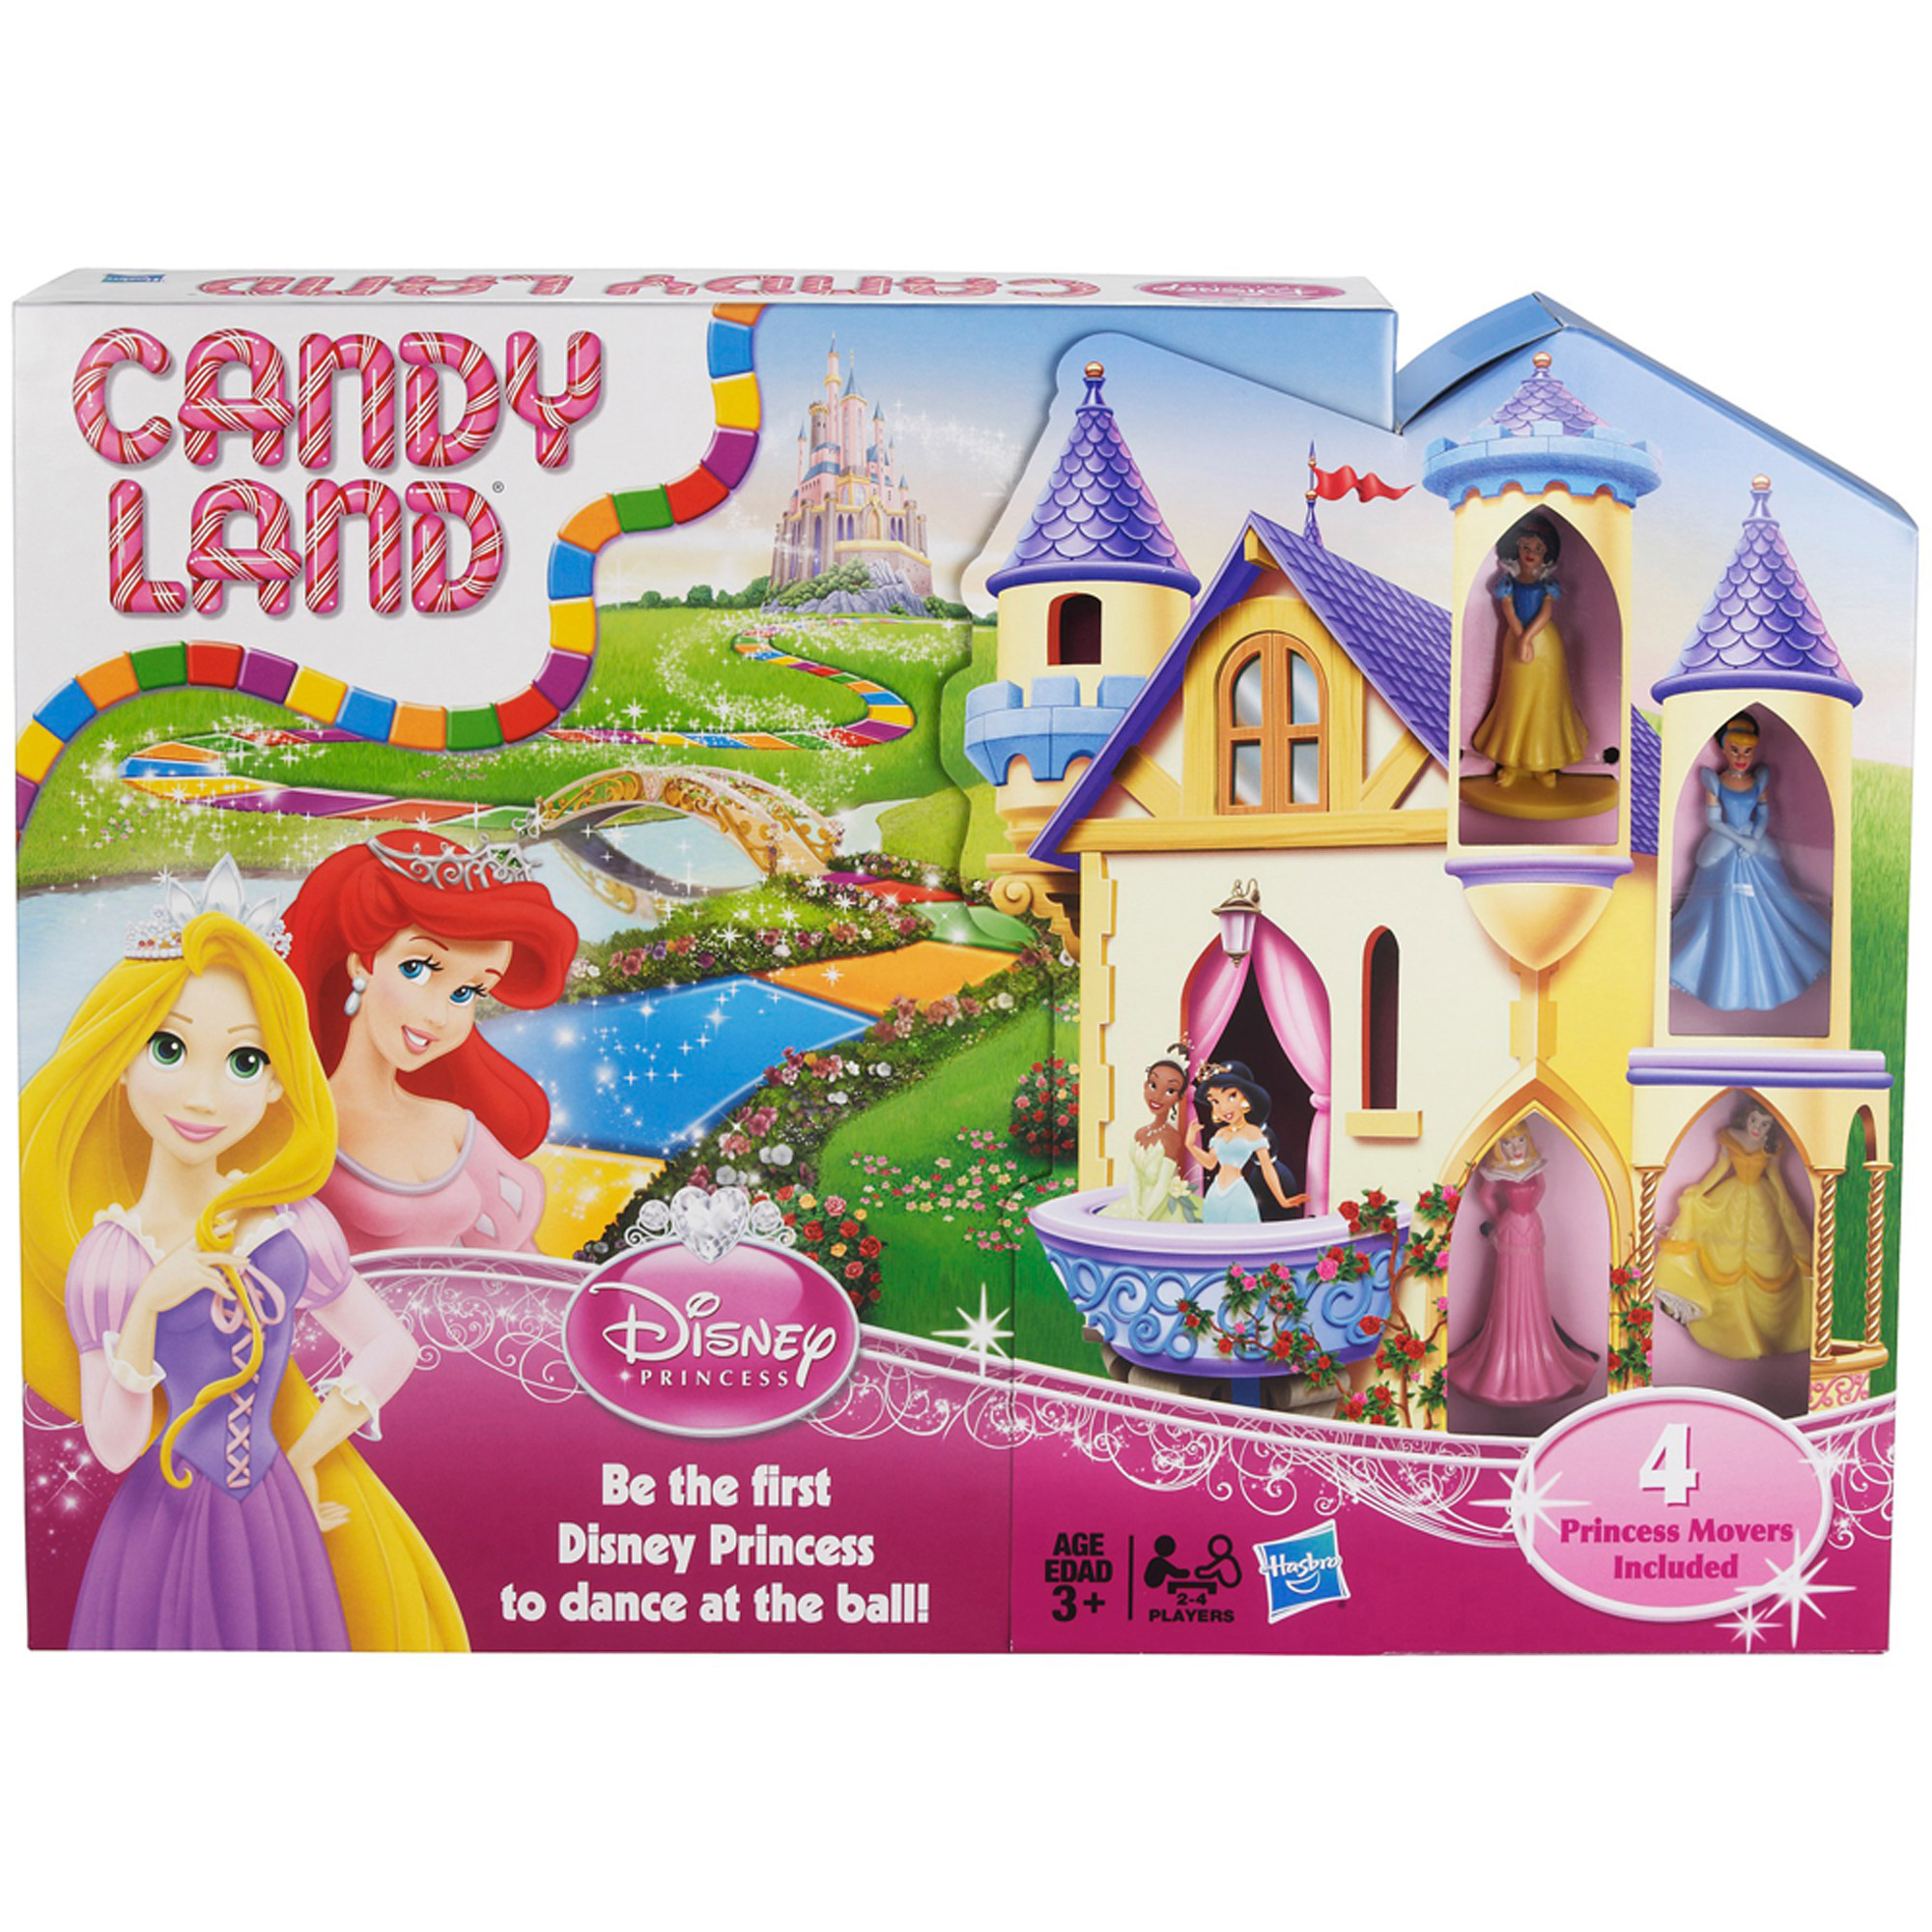 Candy Land Disney Princess Edition, For 2 to 4 players - image 1 of 9